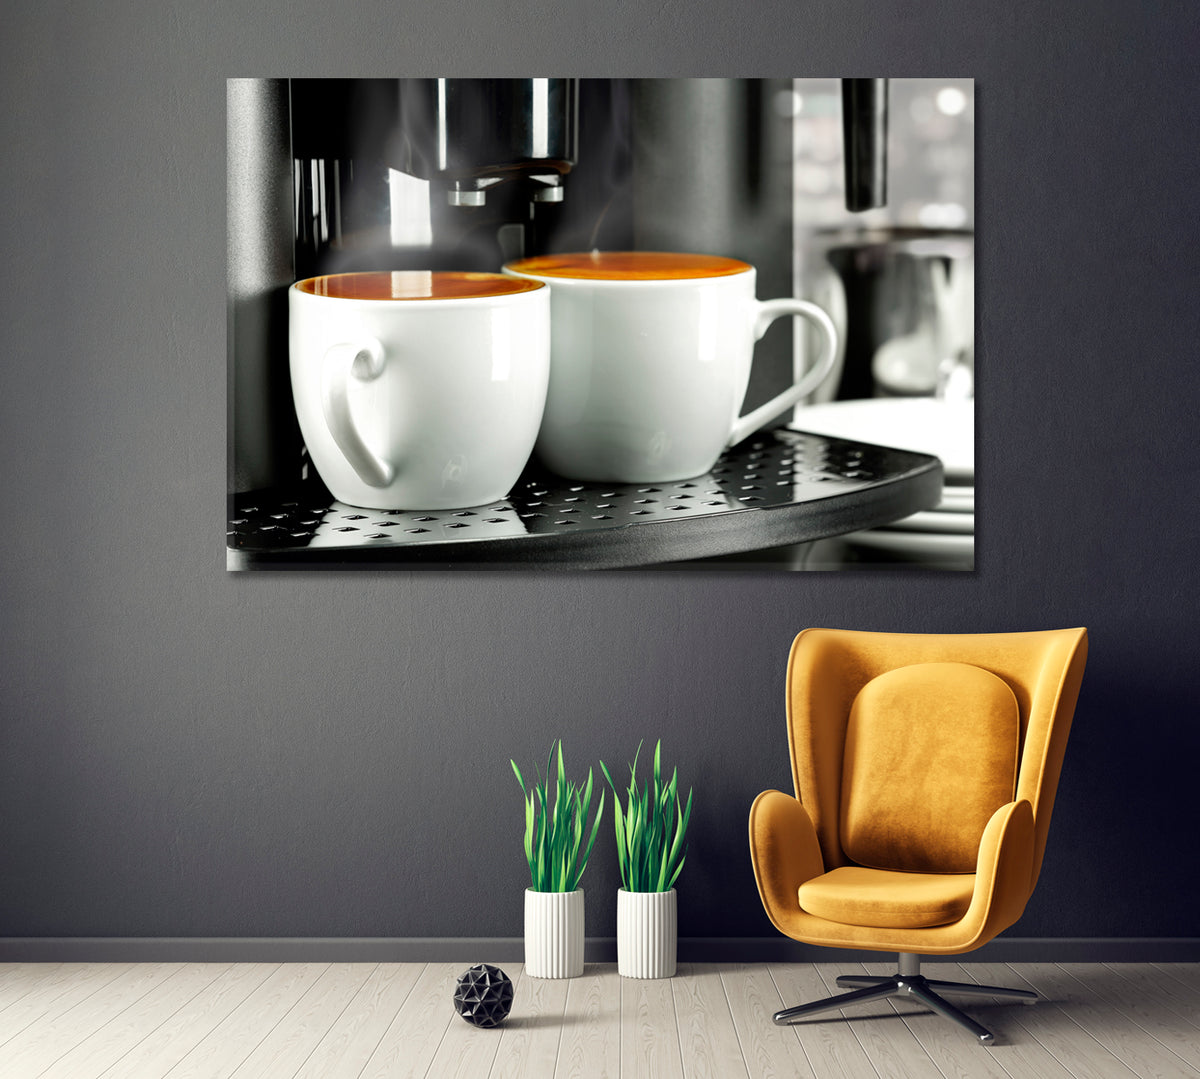 Two Cups of Coffee Canvas Print ArtLexy 1 Panel 24"x16" inches 